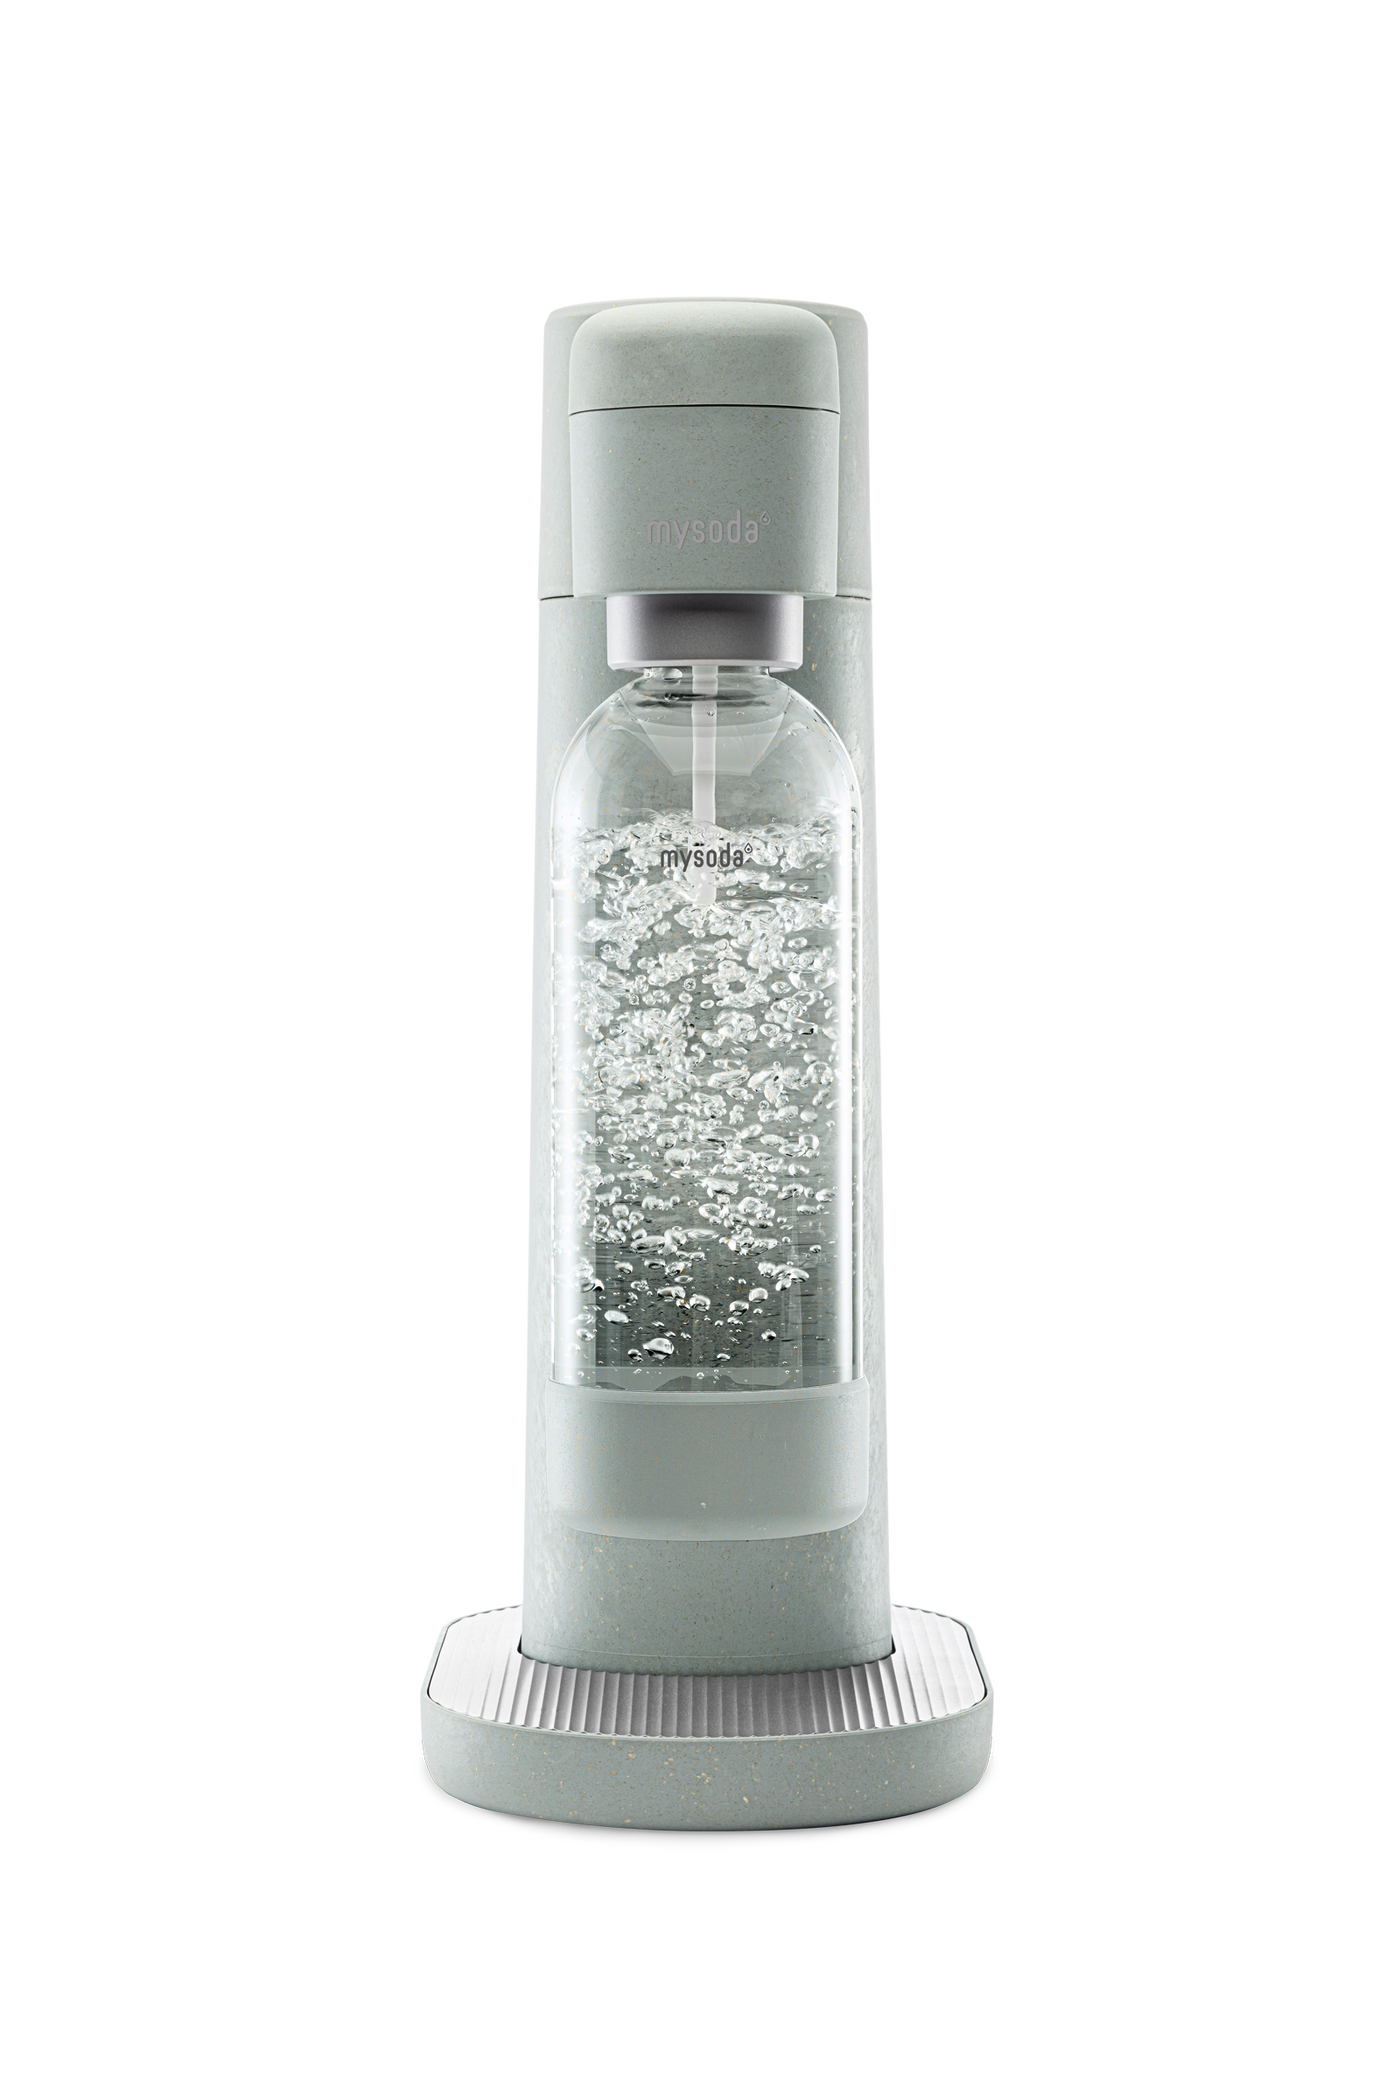 Pigeon Mysoda Toby sparkling water maker viewed from the front